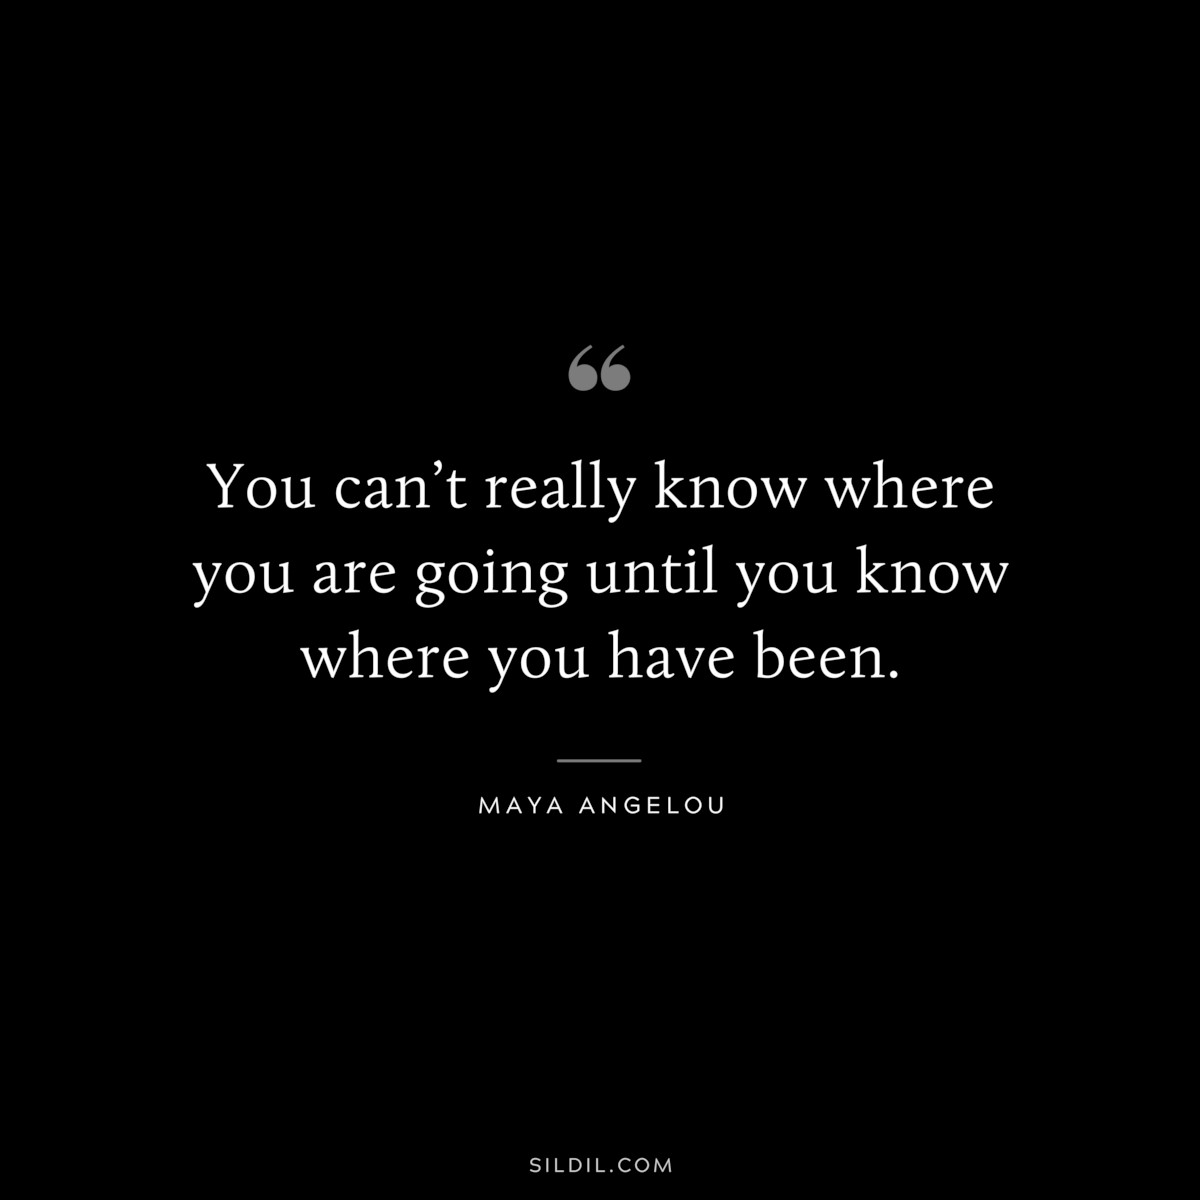 You can’t really know where you are going until you know where you have been. ― Maya Angelou